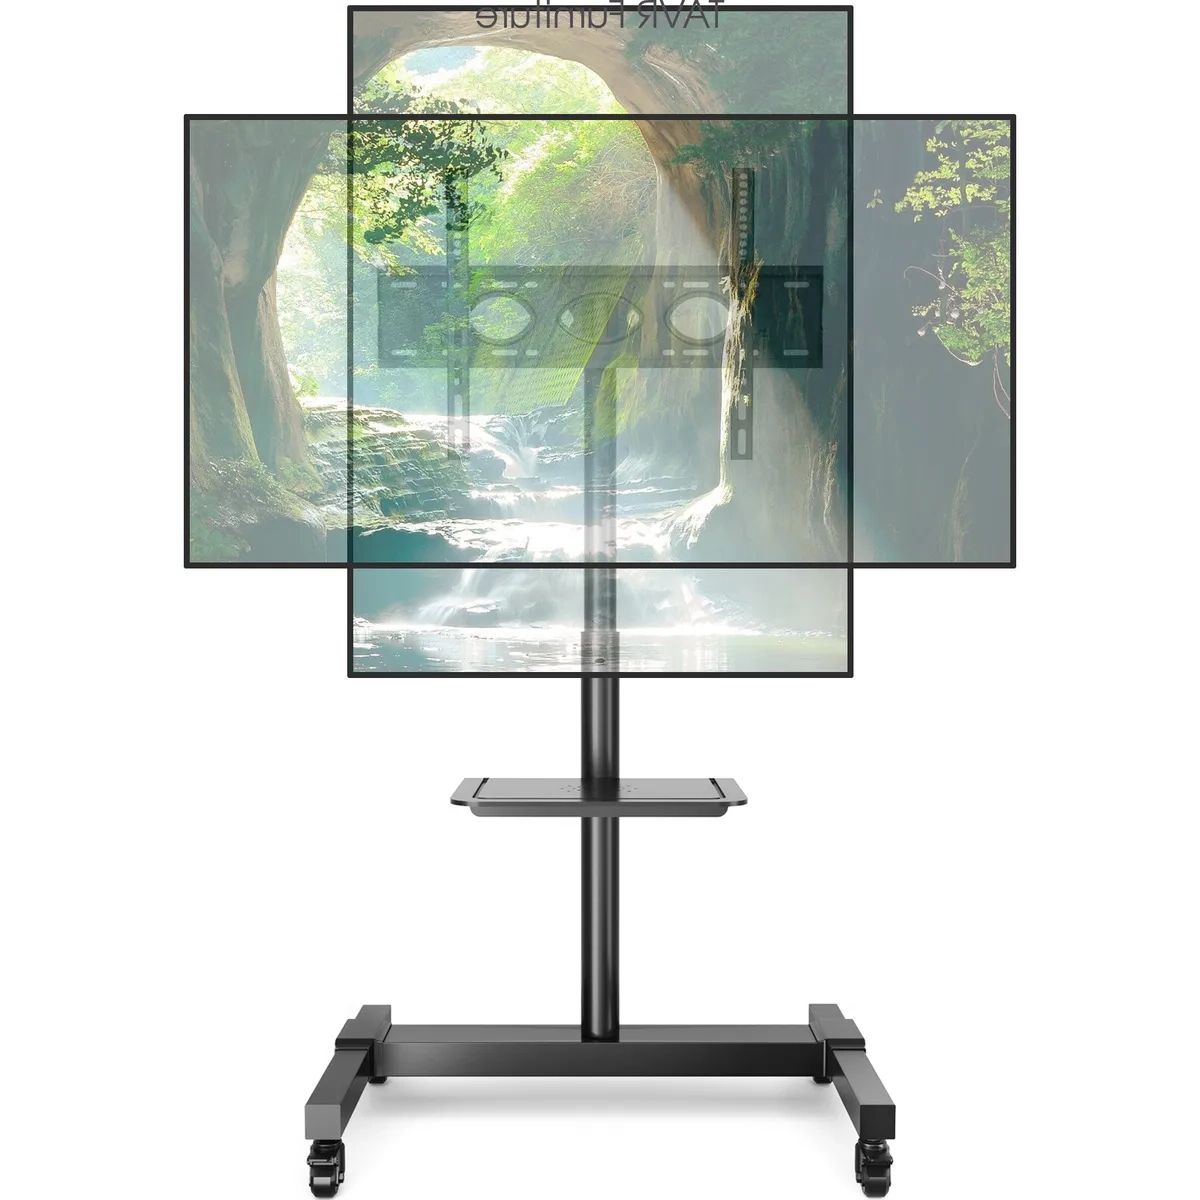 Universal Mobile Tv Stand Tilt Rolling Tv Cart With Wheels For Tvs Up To 70  Inch | Ebay For Mobile Tilt Rolling Tv Stands (Gallery 2 of 20)